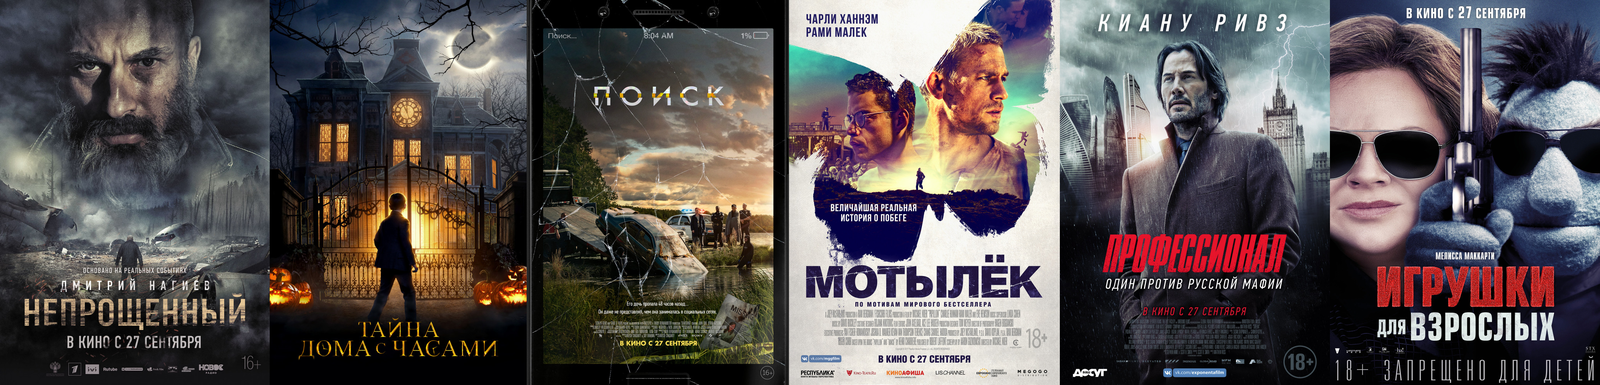 Russian box office receipts and distribution of screenings over the past weekend (September 27 - 30) - Movies, Box office fees, Film distribution, Unforgiven, , Search, Butterfly, Professional